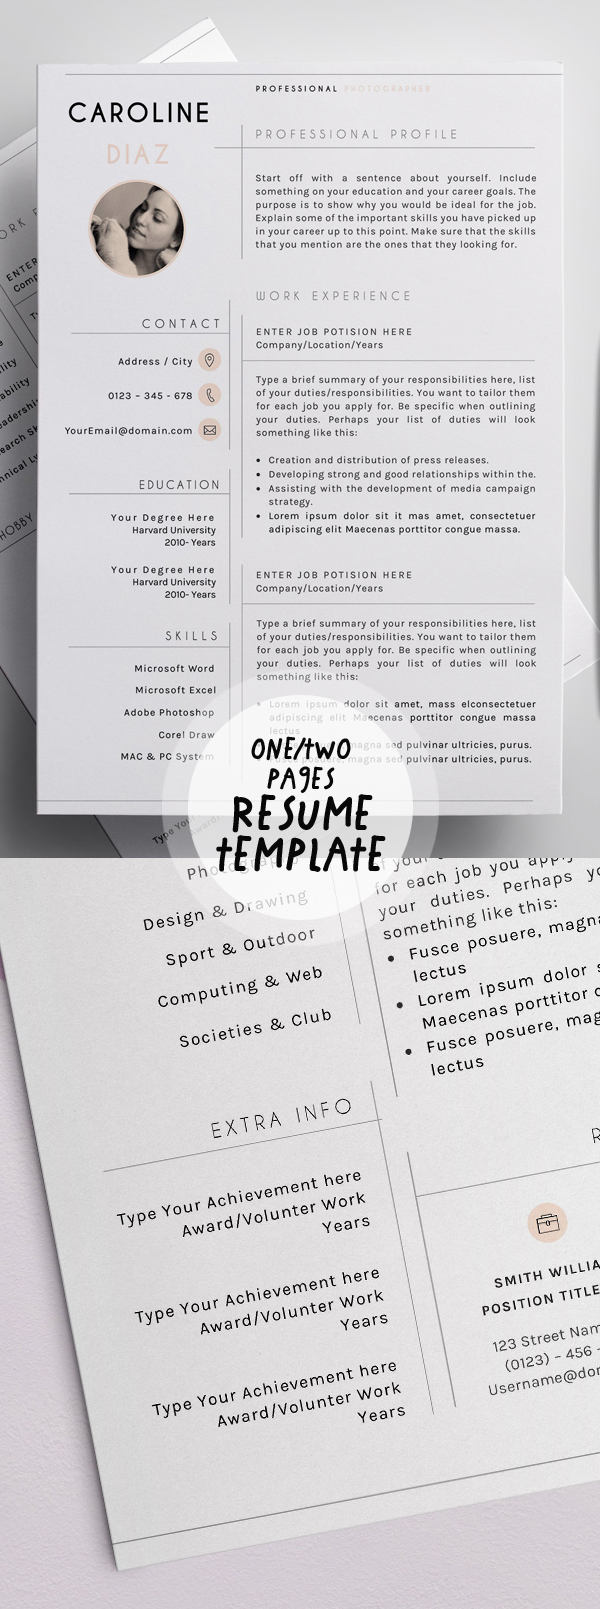 One or Two Page Resume Templates